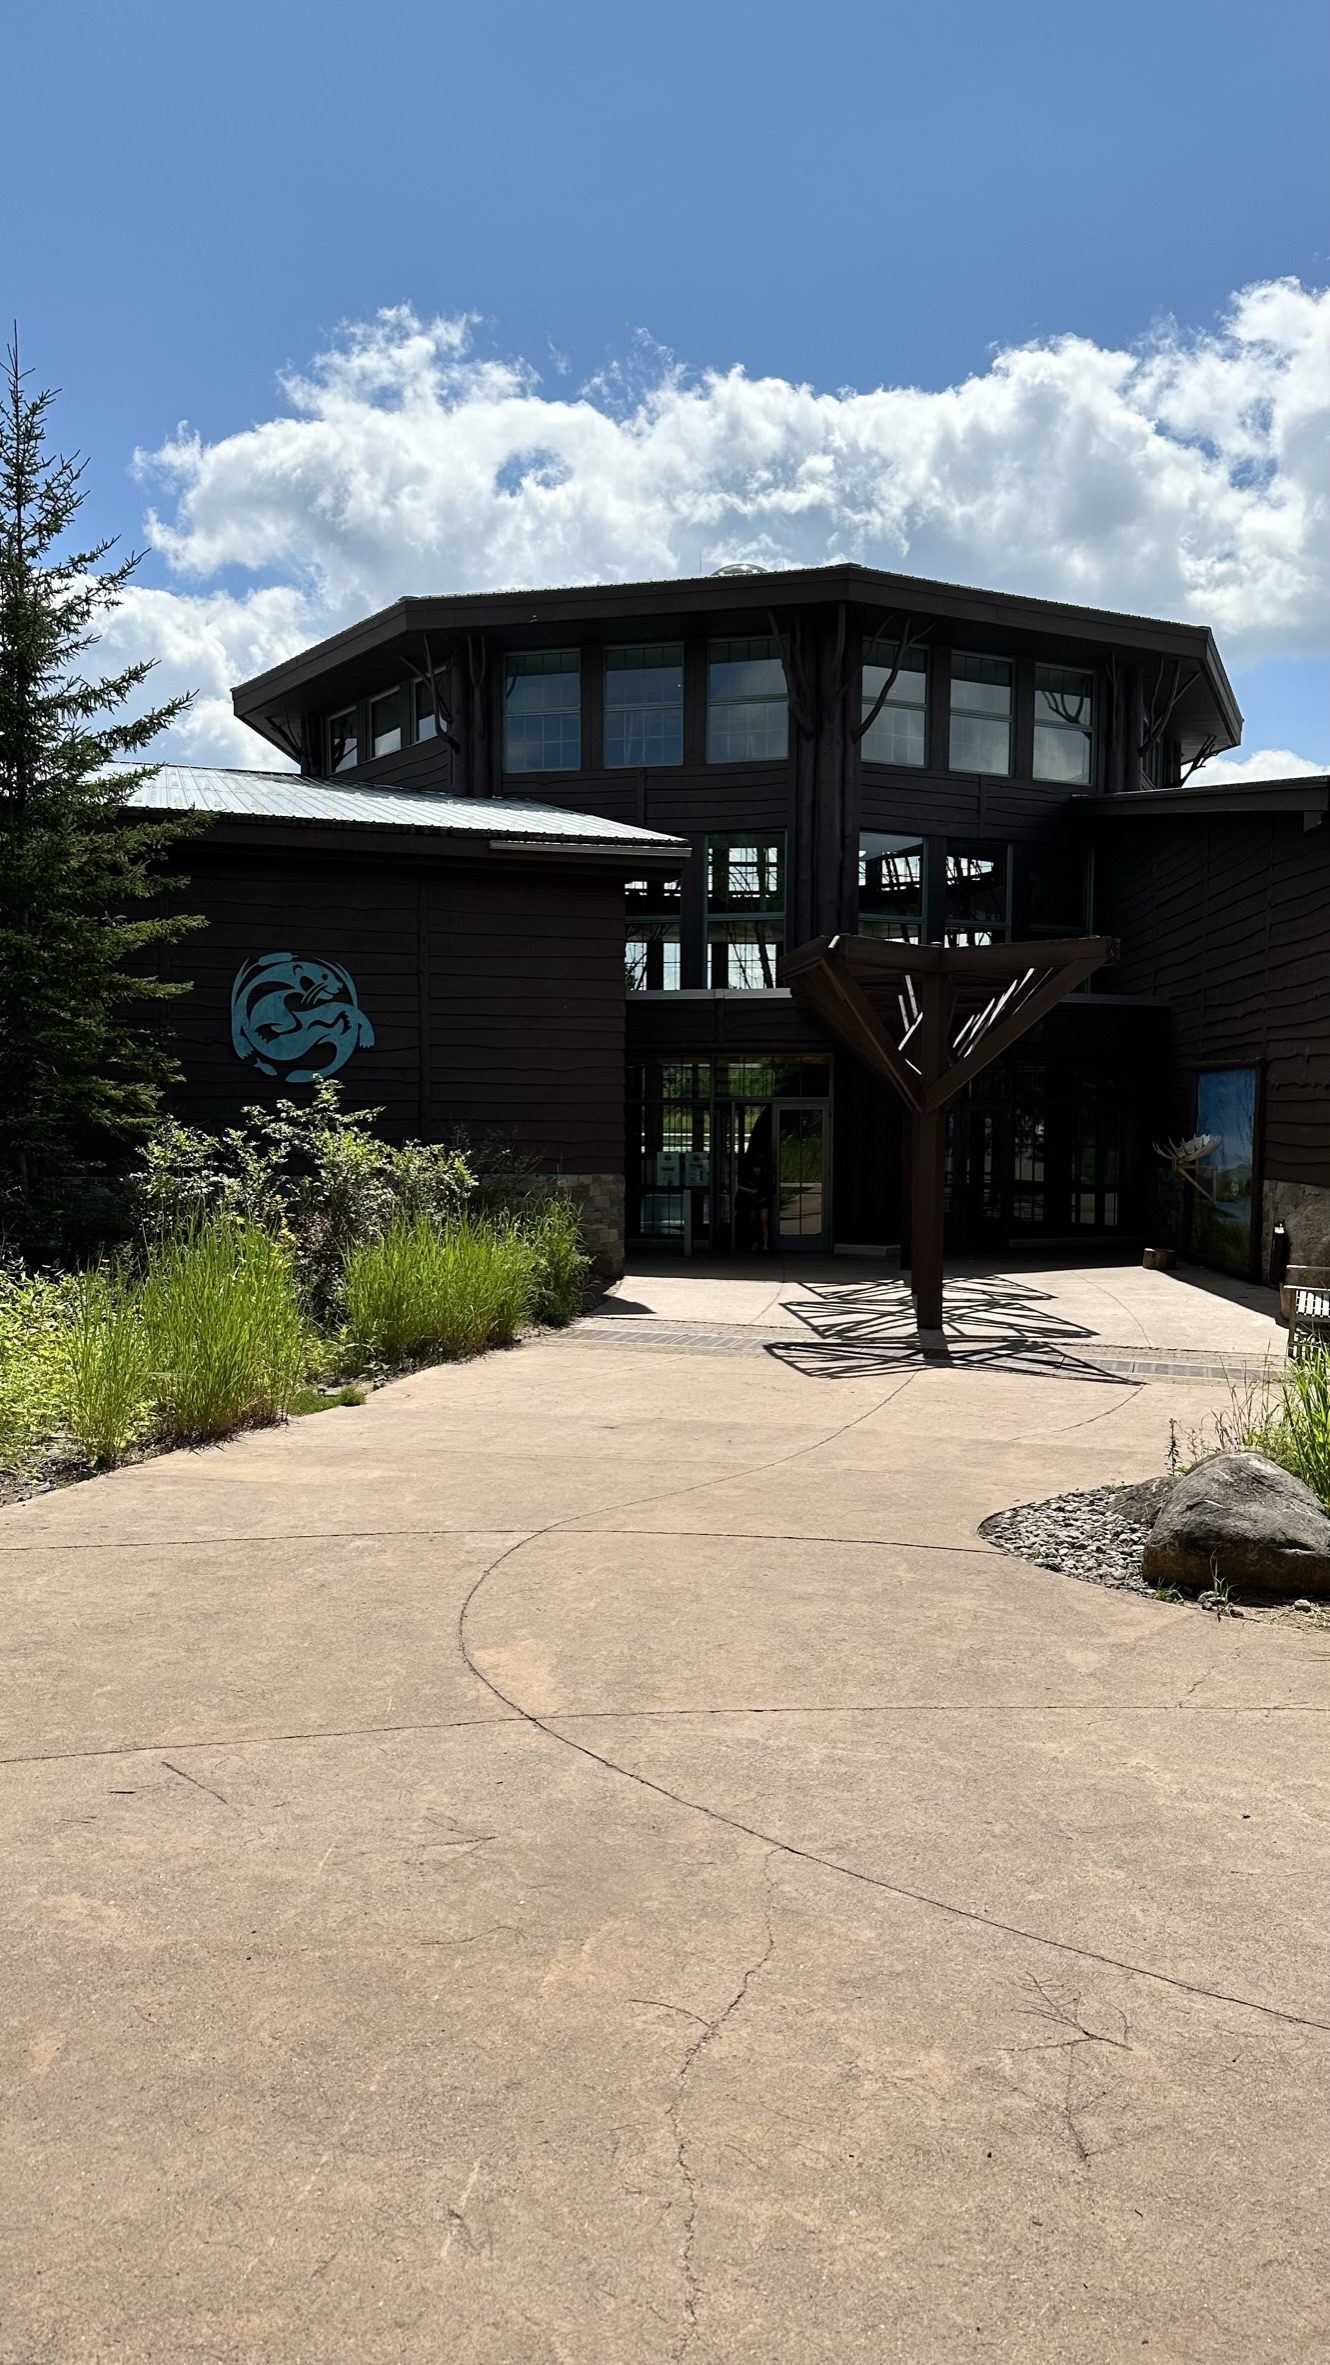 Take a Walk on the Wild Side at the Wild Center​ - entrance to the wild center